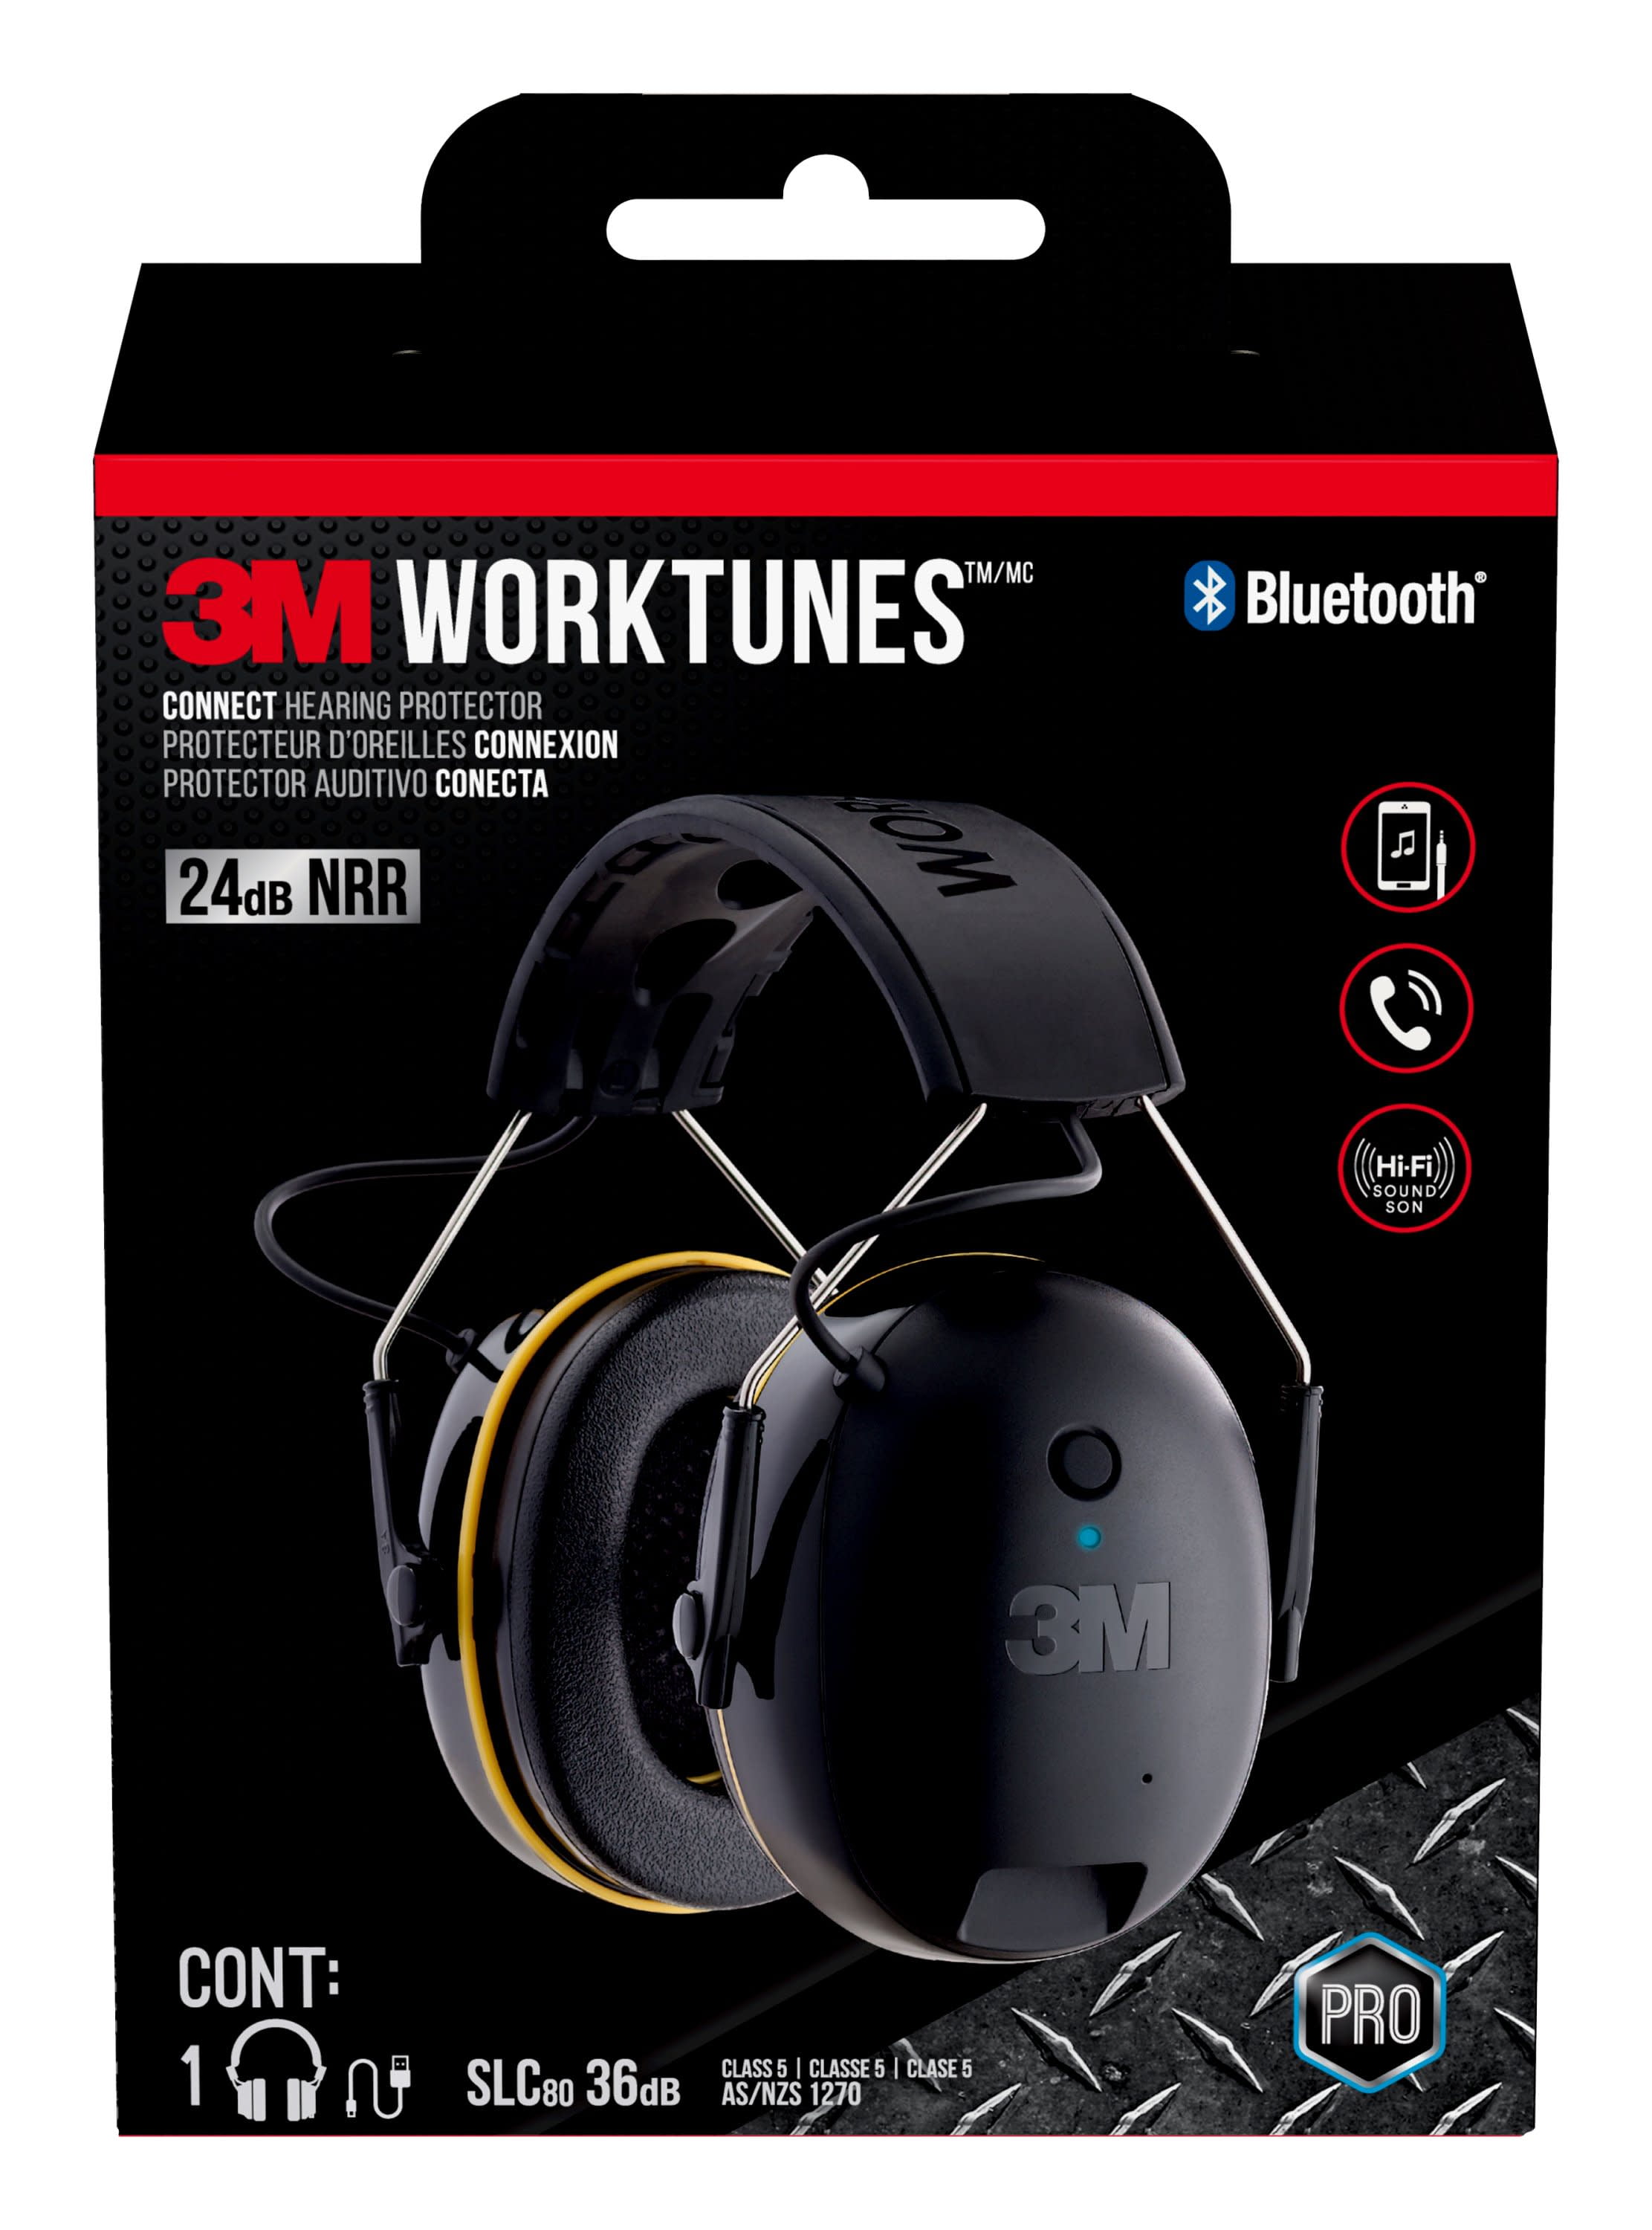 Hearing Protector 3M Worktunes Muff Headset HI-FI Sound Ear Connect Bluetooth W 